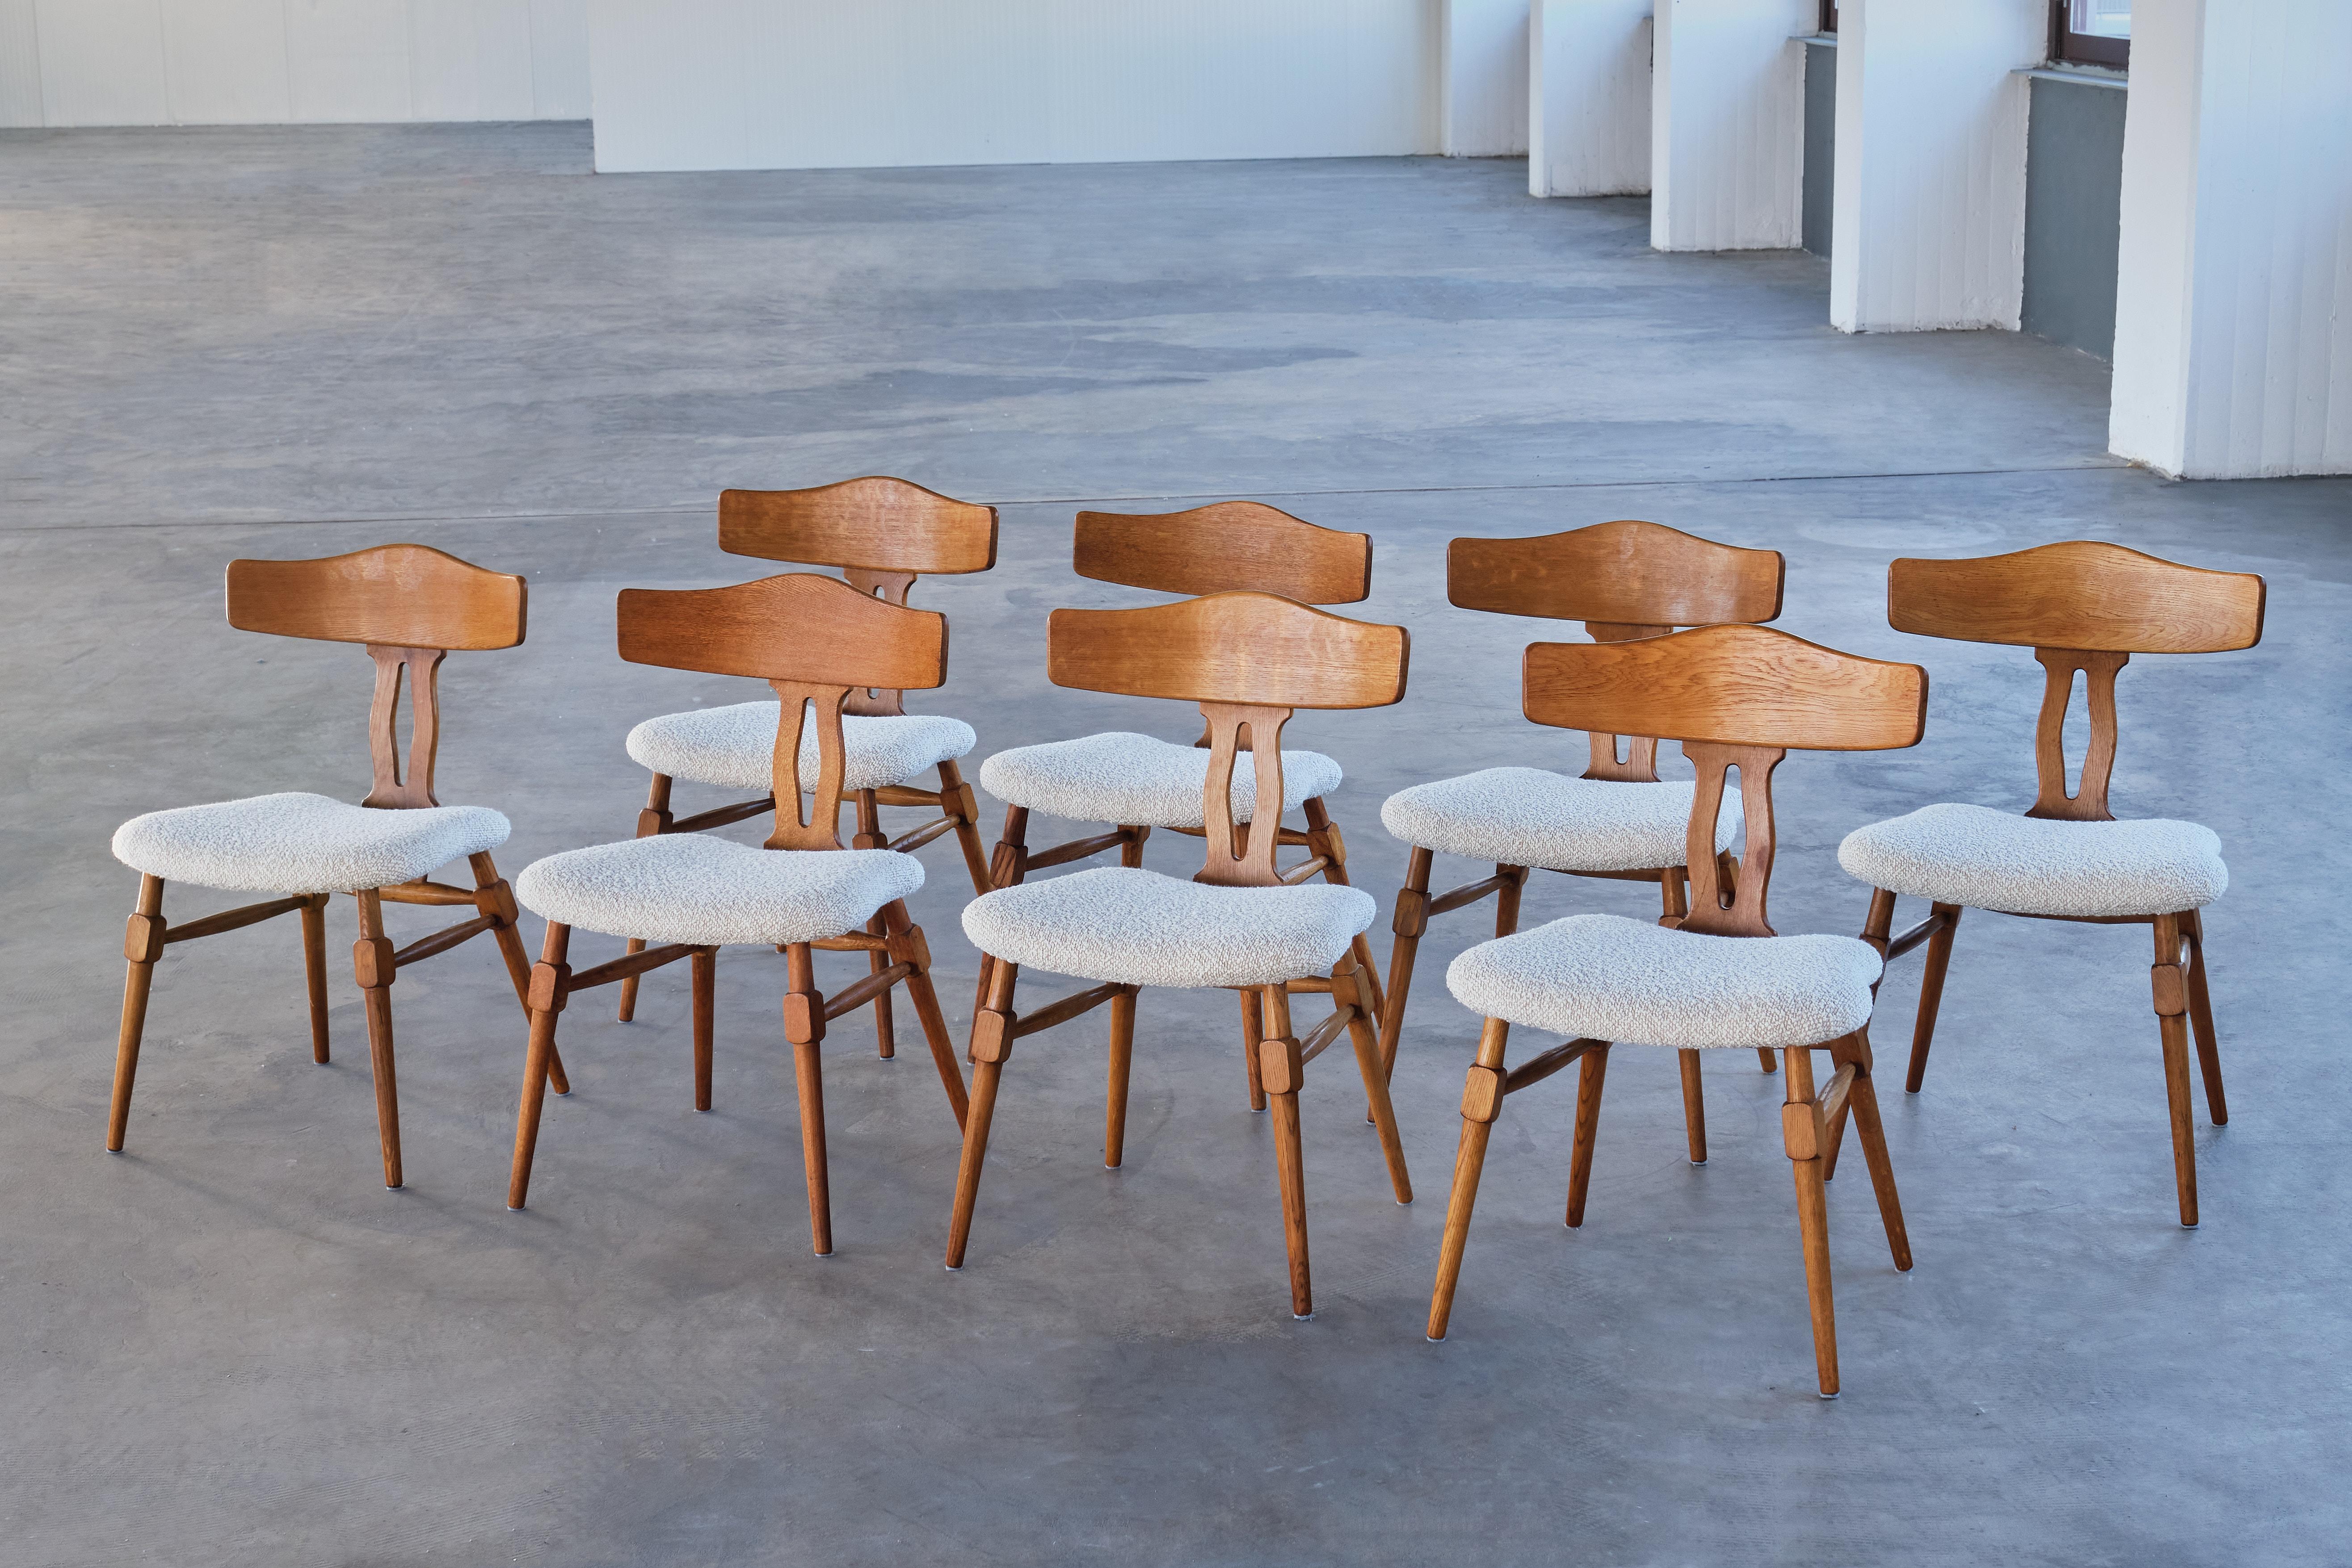 This rare set of dining room chairs was designed by Henning (Henry) Kjærnulf in the late 1950s. The chairs were produced by Nyrup Møbelfabrik in Denmark.  

The set consists of eight chairs made of solid oak with a beautiful grain and colour. The